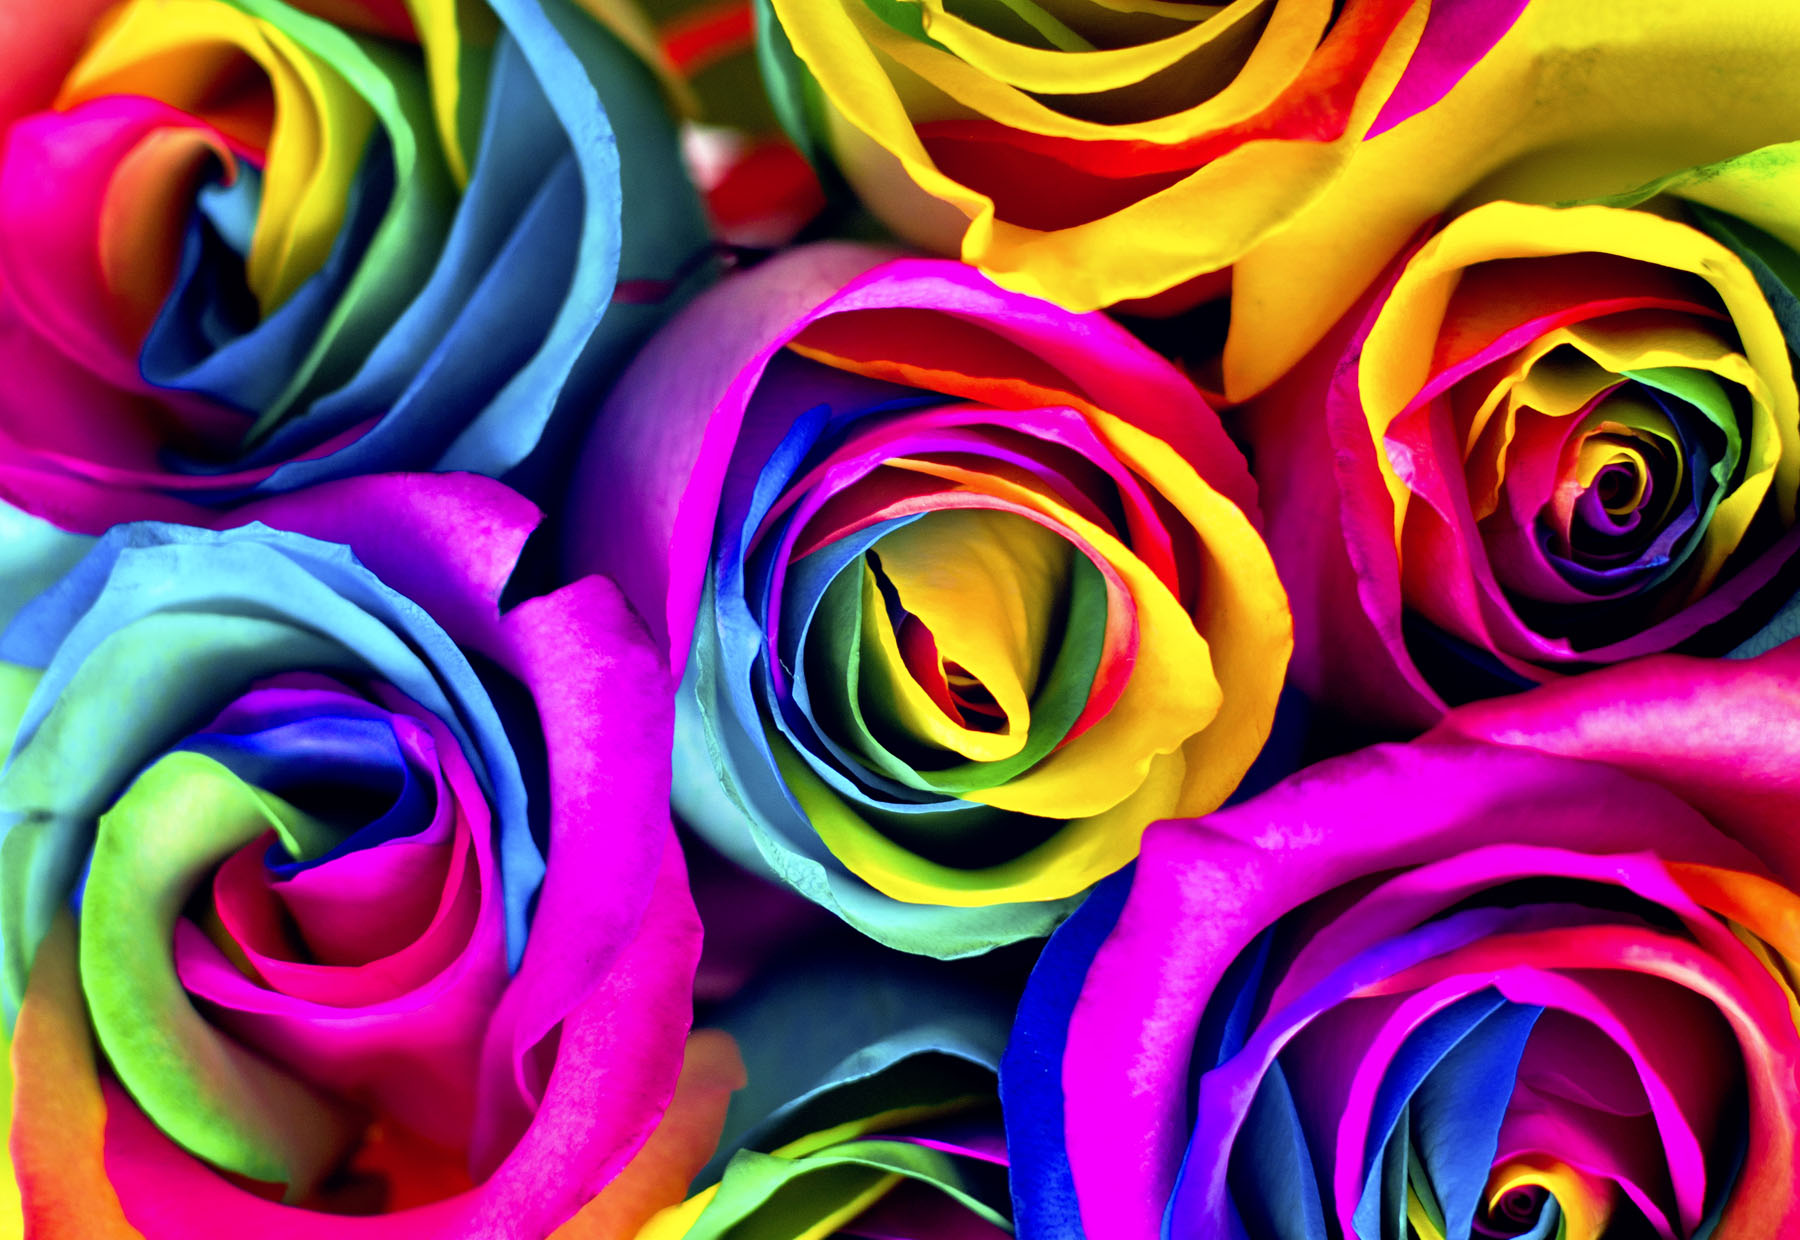 How To Dye Roses Different Colors